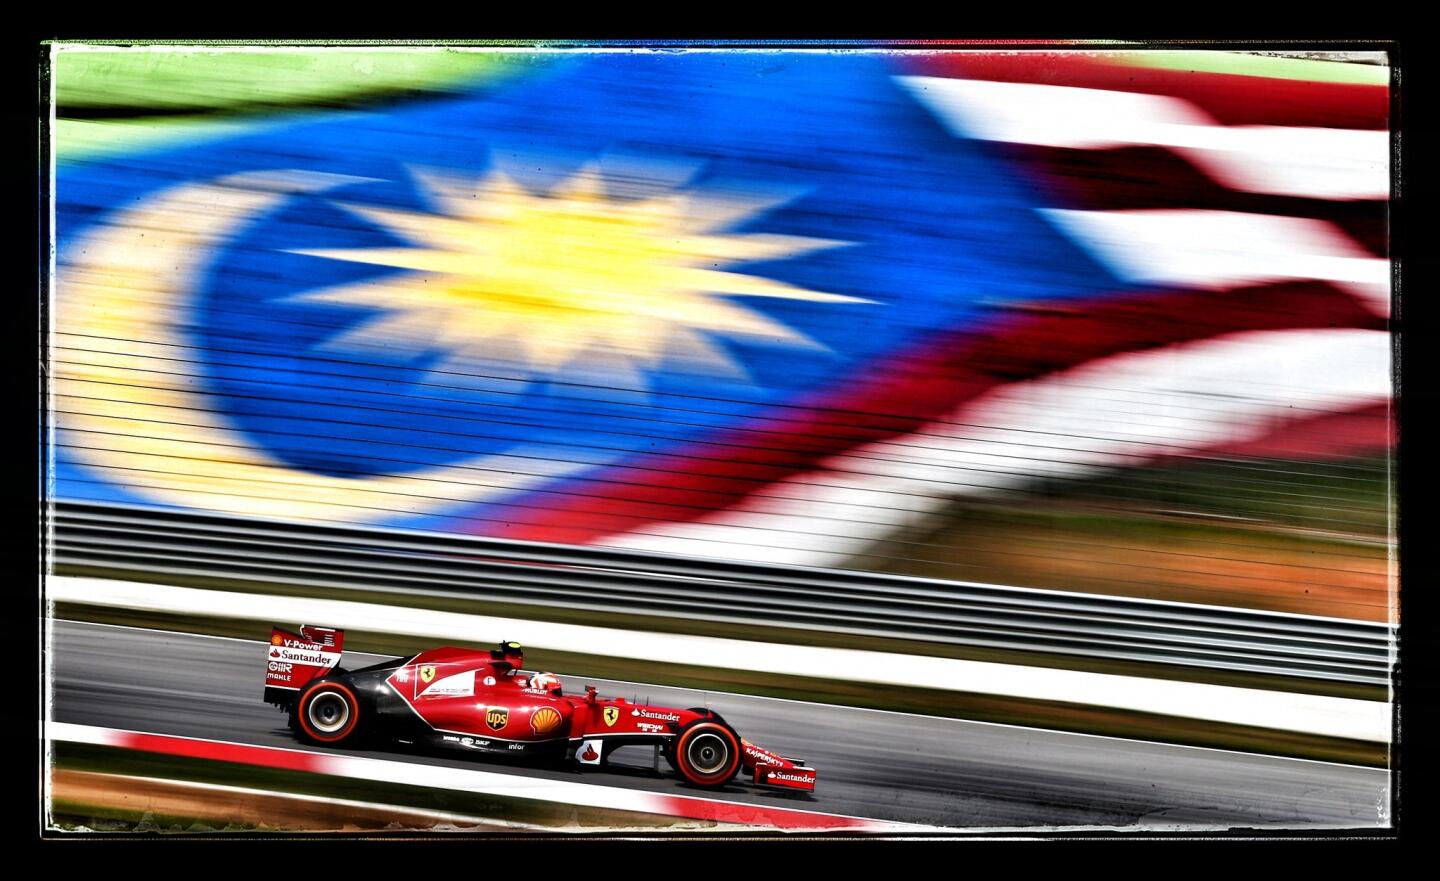 Kimi Raikkonen of Finland drives during practice for the Malaysia Formula One Grand Prix.